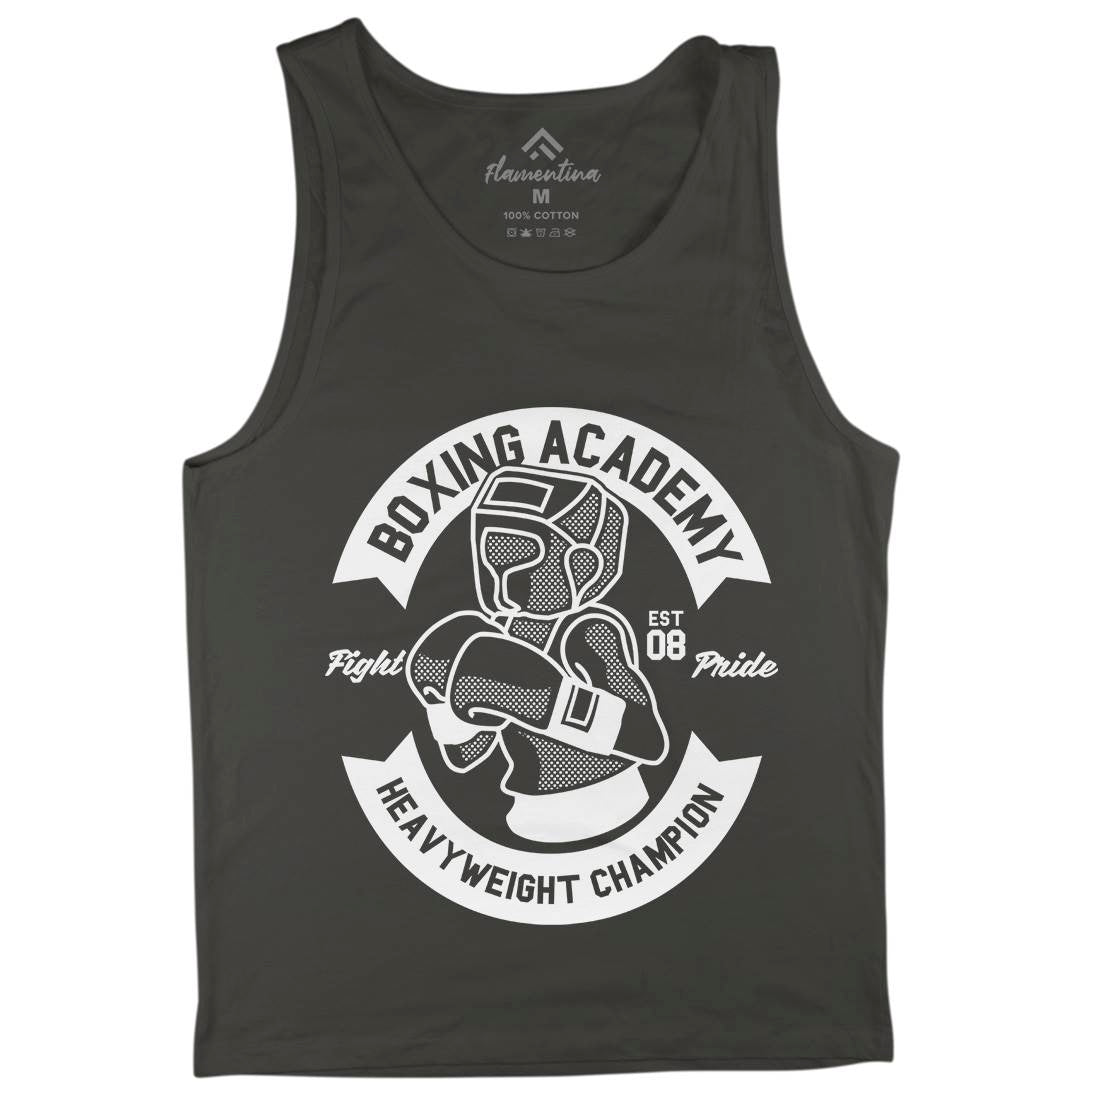 Boxing Academy Mens Tank Top Vest Gym A213